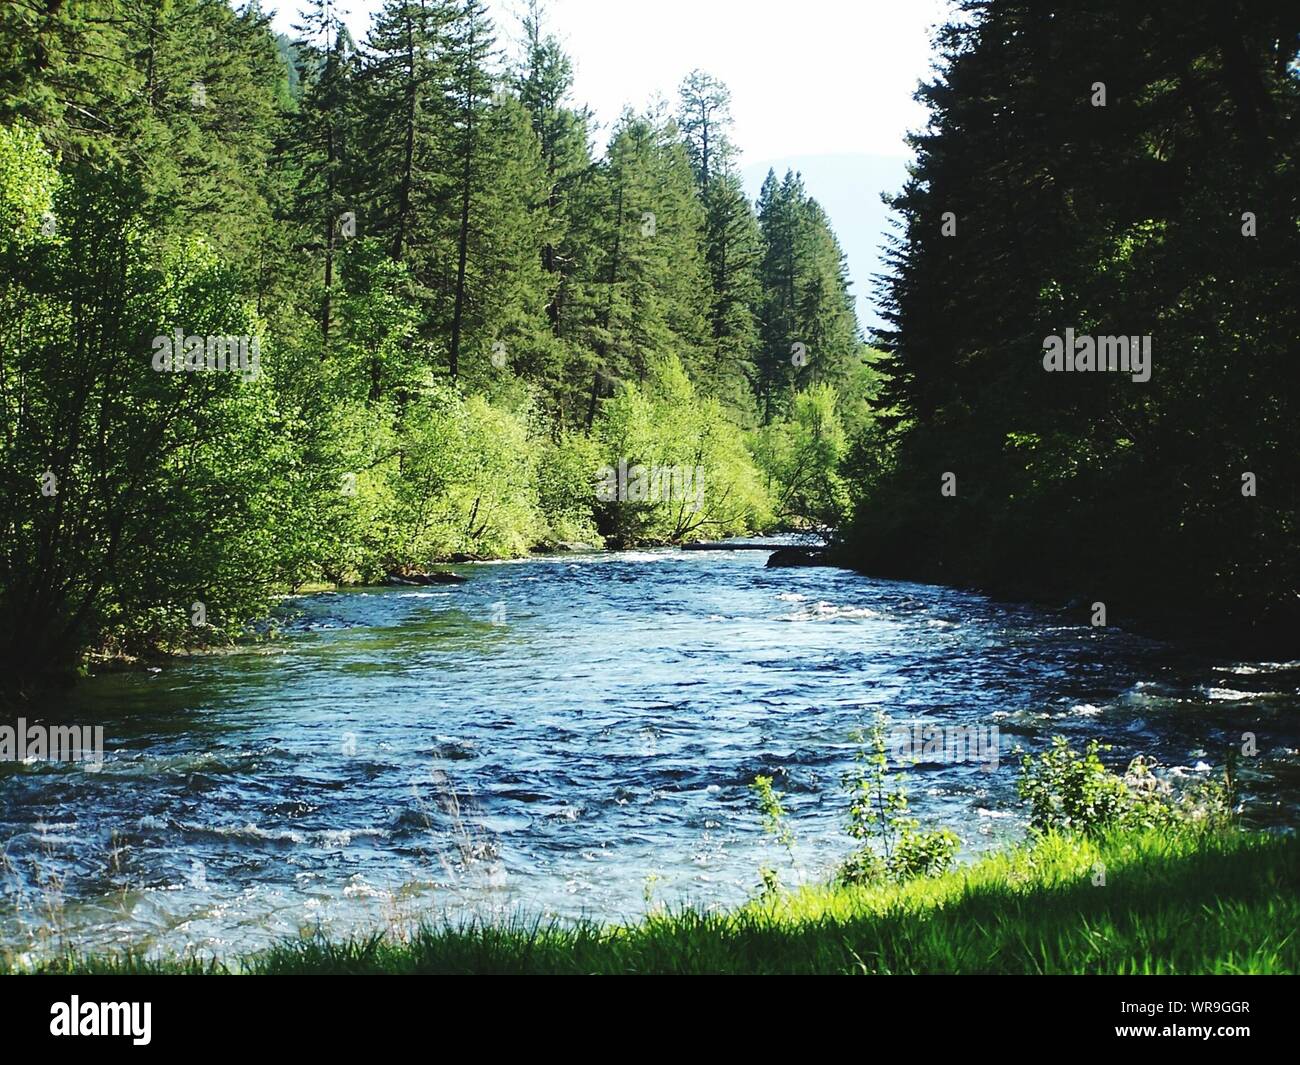 Clark Fork River Flowing Amidst Trees Stock Photo